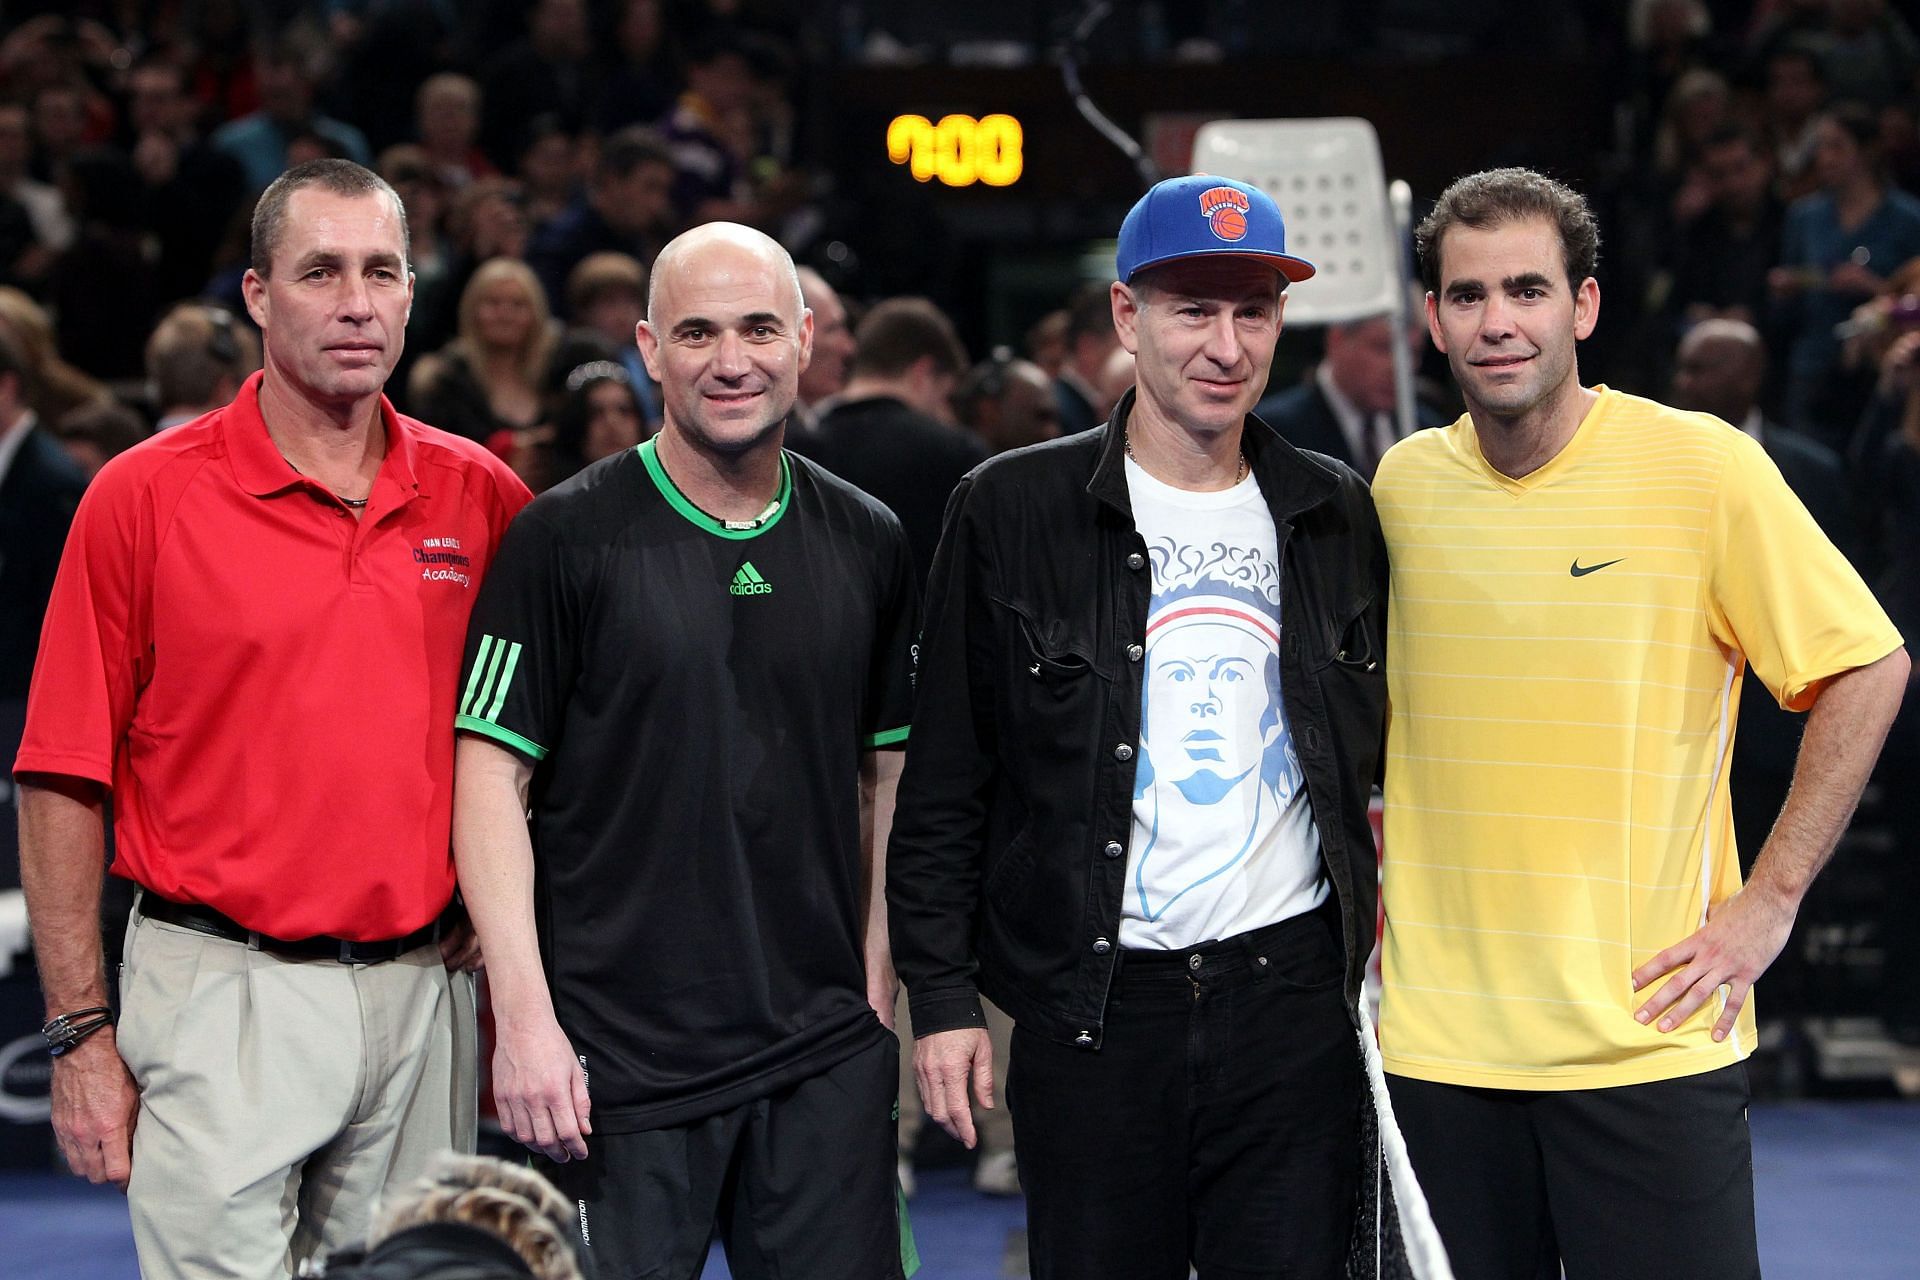 Pete Sampras and Andre Agassi with John McEnroe and Ivan Lendl